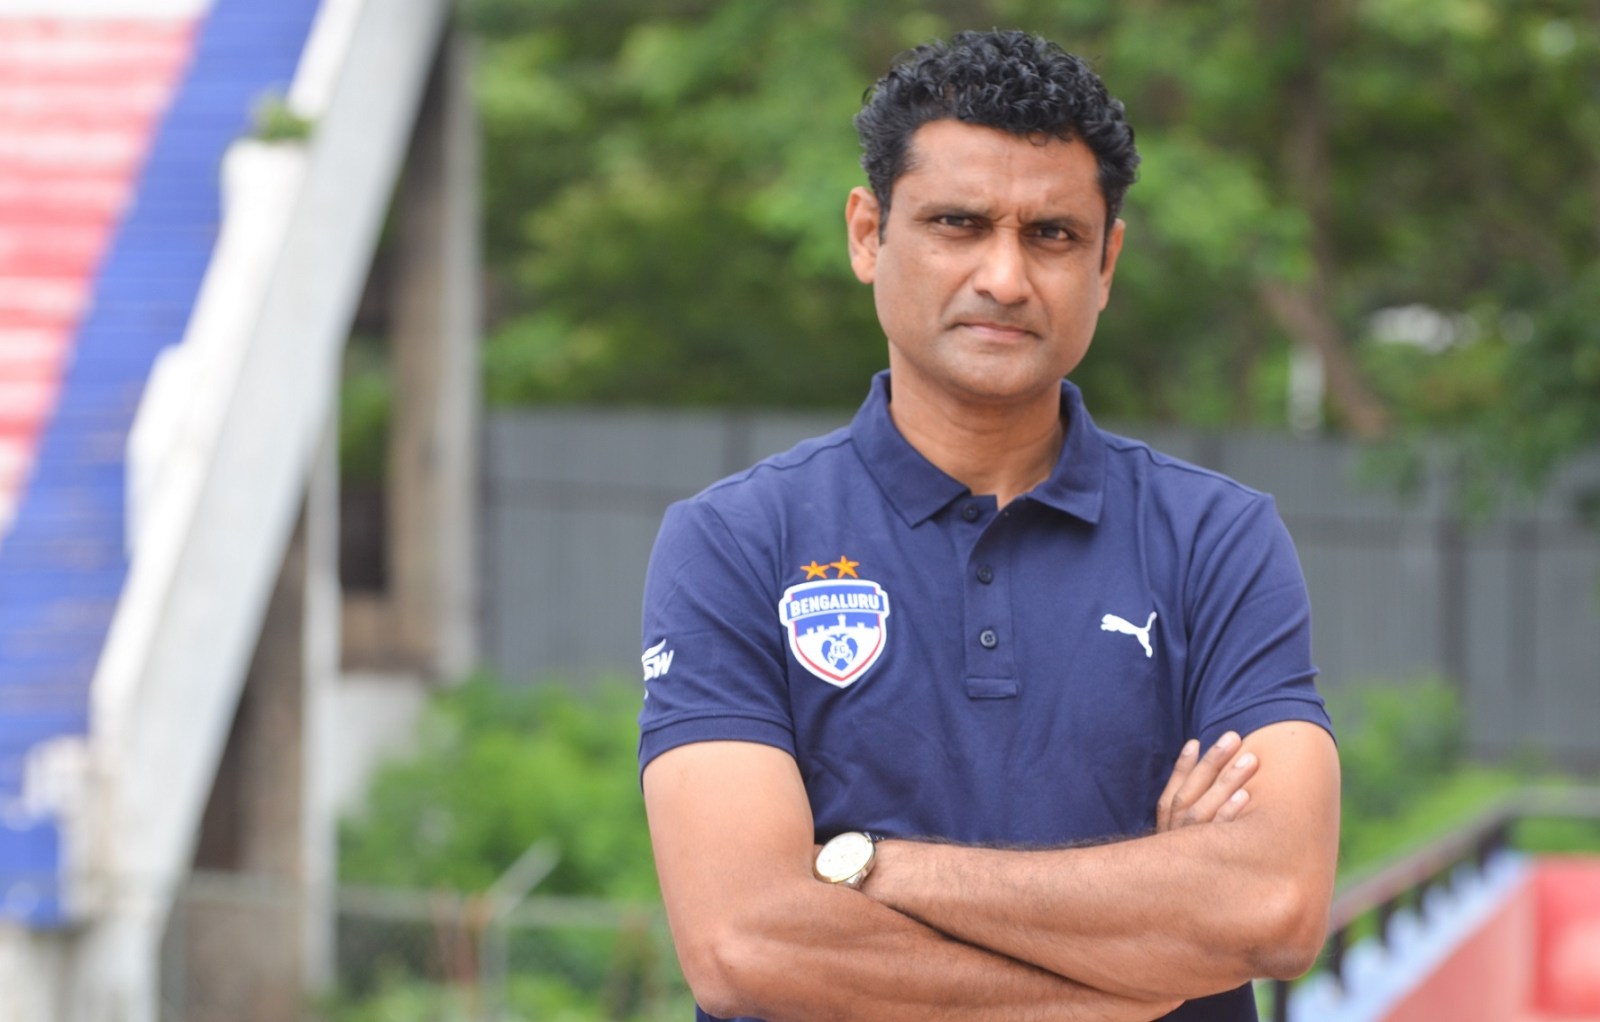 ISL 2020-21 | Things are still open and we don't want to give up, asserts Naushad Moosa